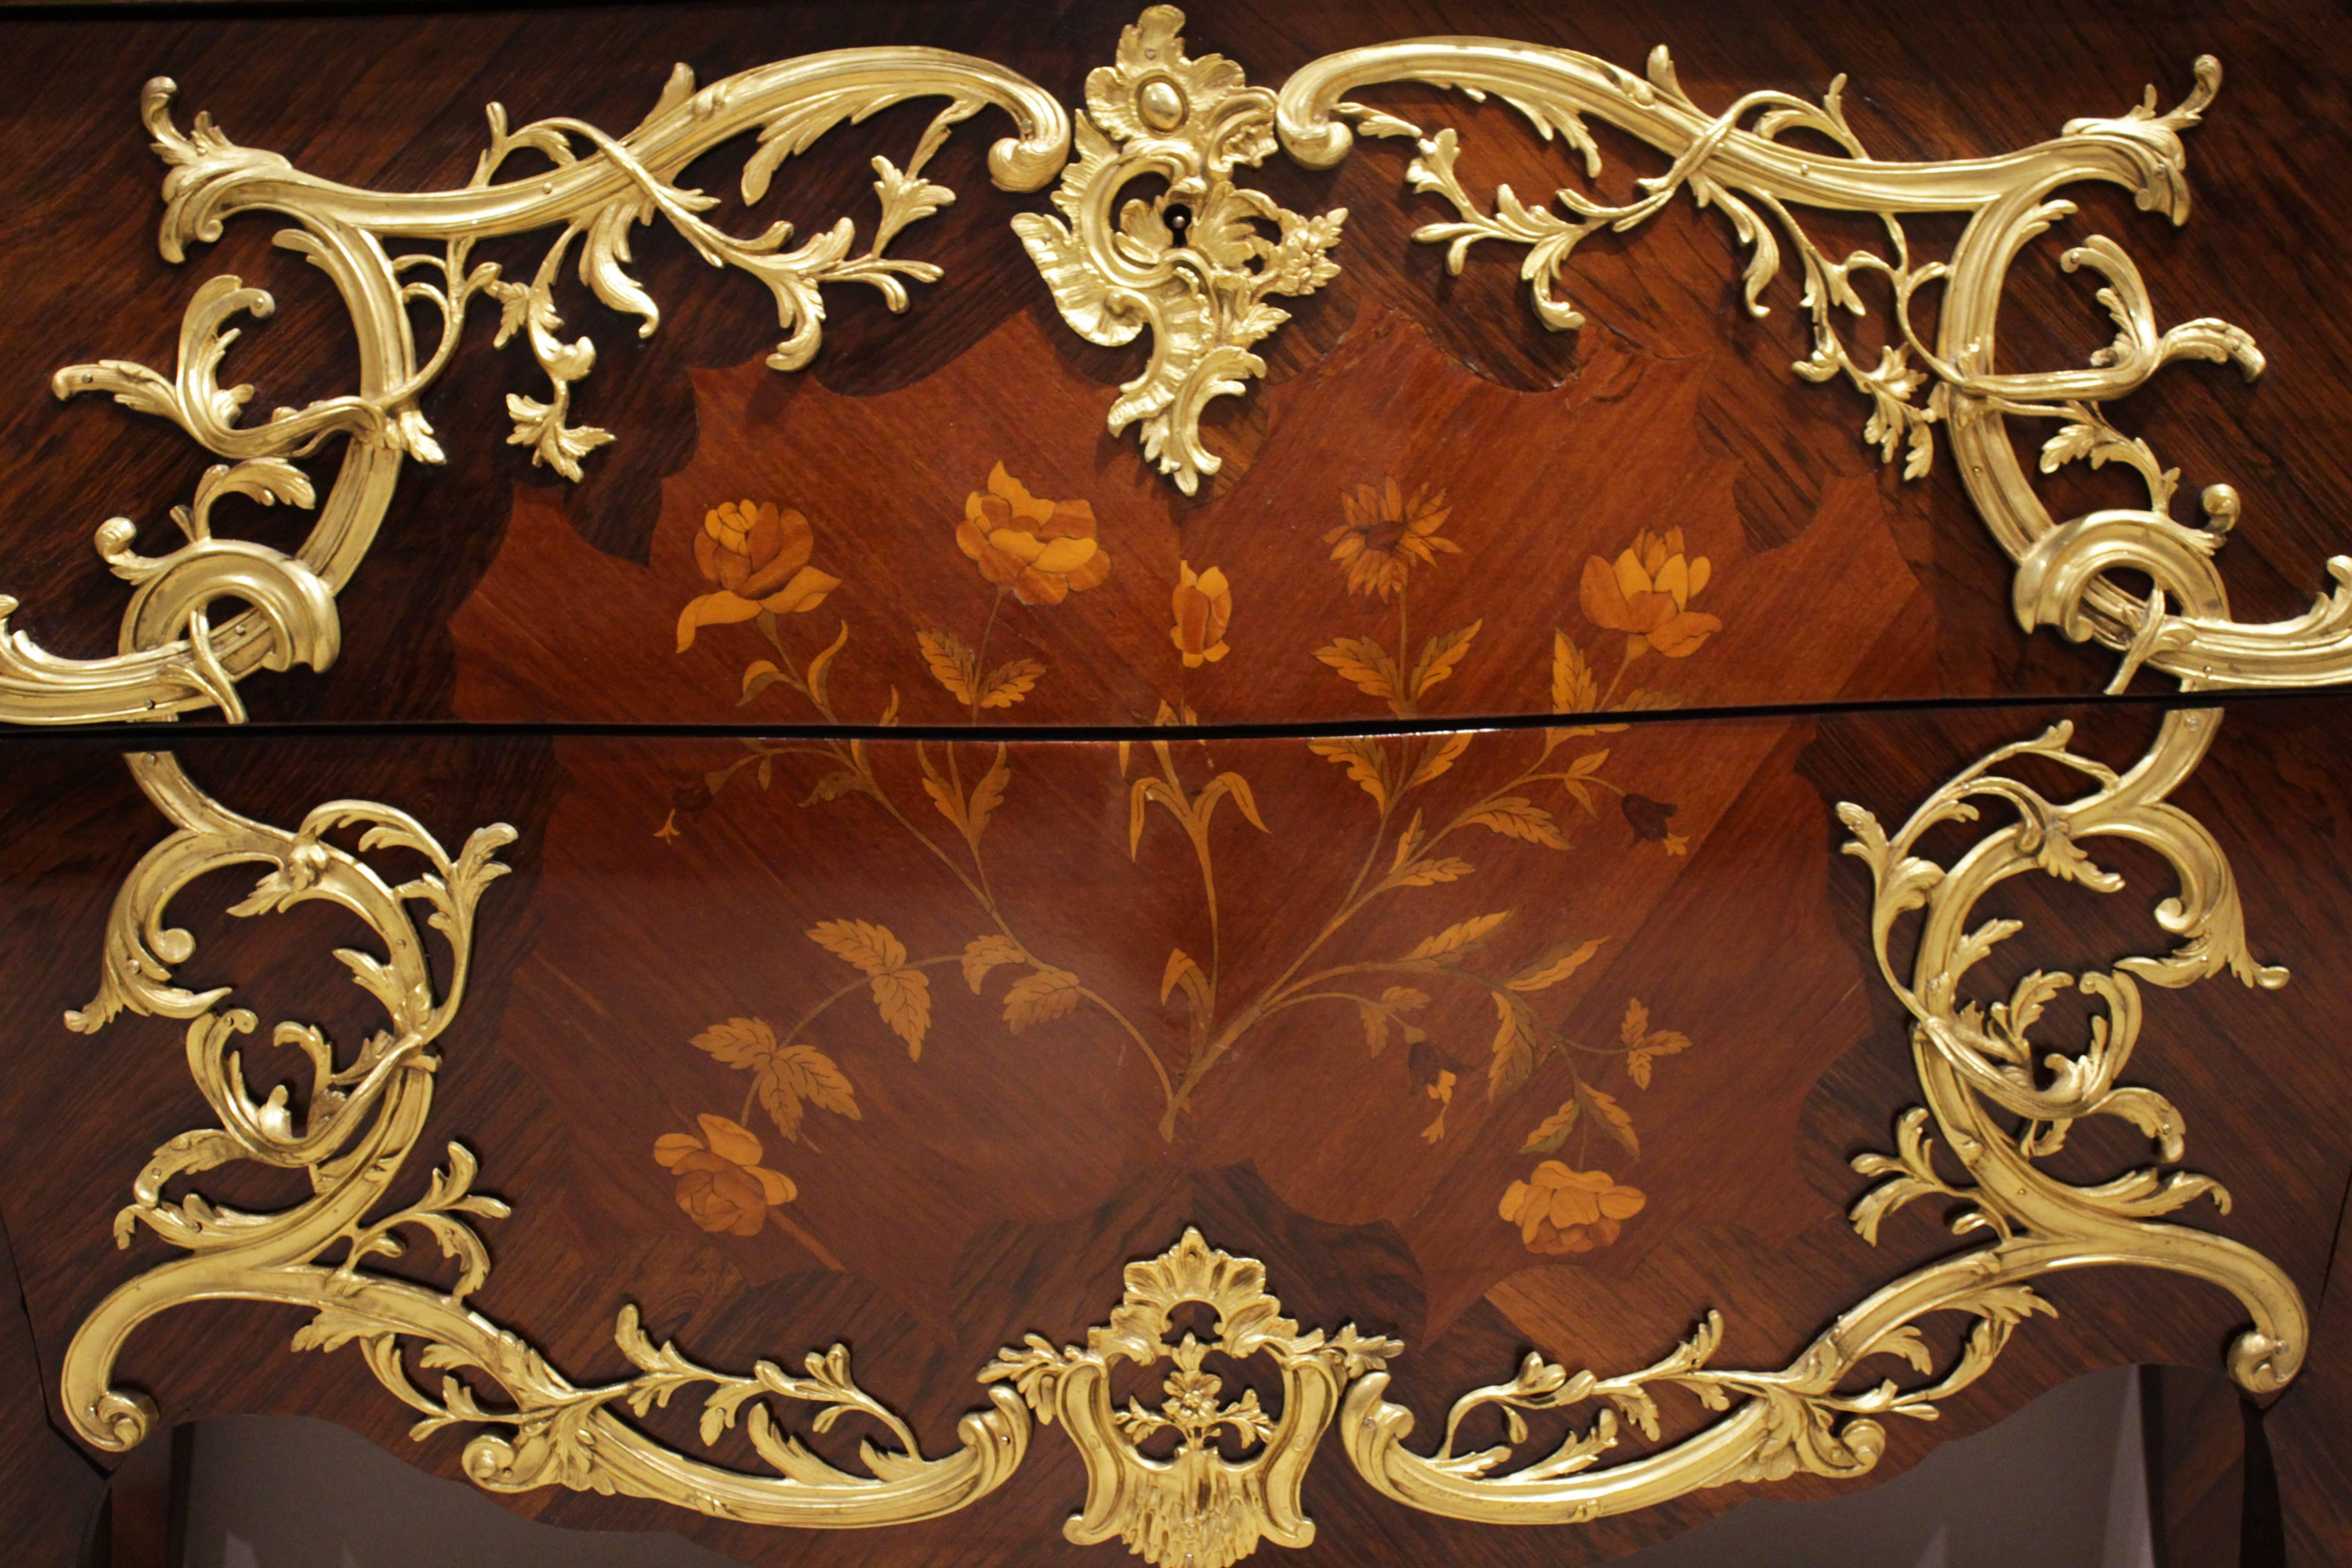 French ormolu-mounted marquetry commode
marble top with gilt bronze mounts, signed.
France, 19th century
Measures: H 33 in.; W 43 in.; D 19 in.

Please note this item is currently located at our Palm Beach location.